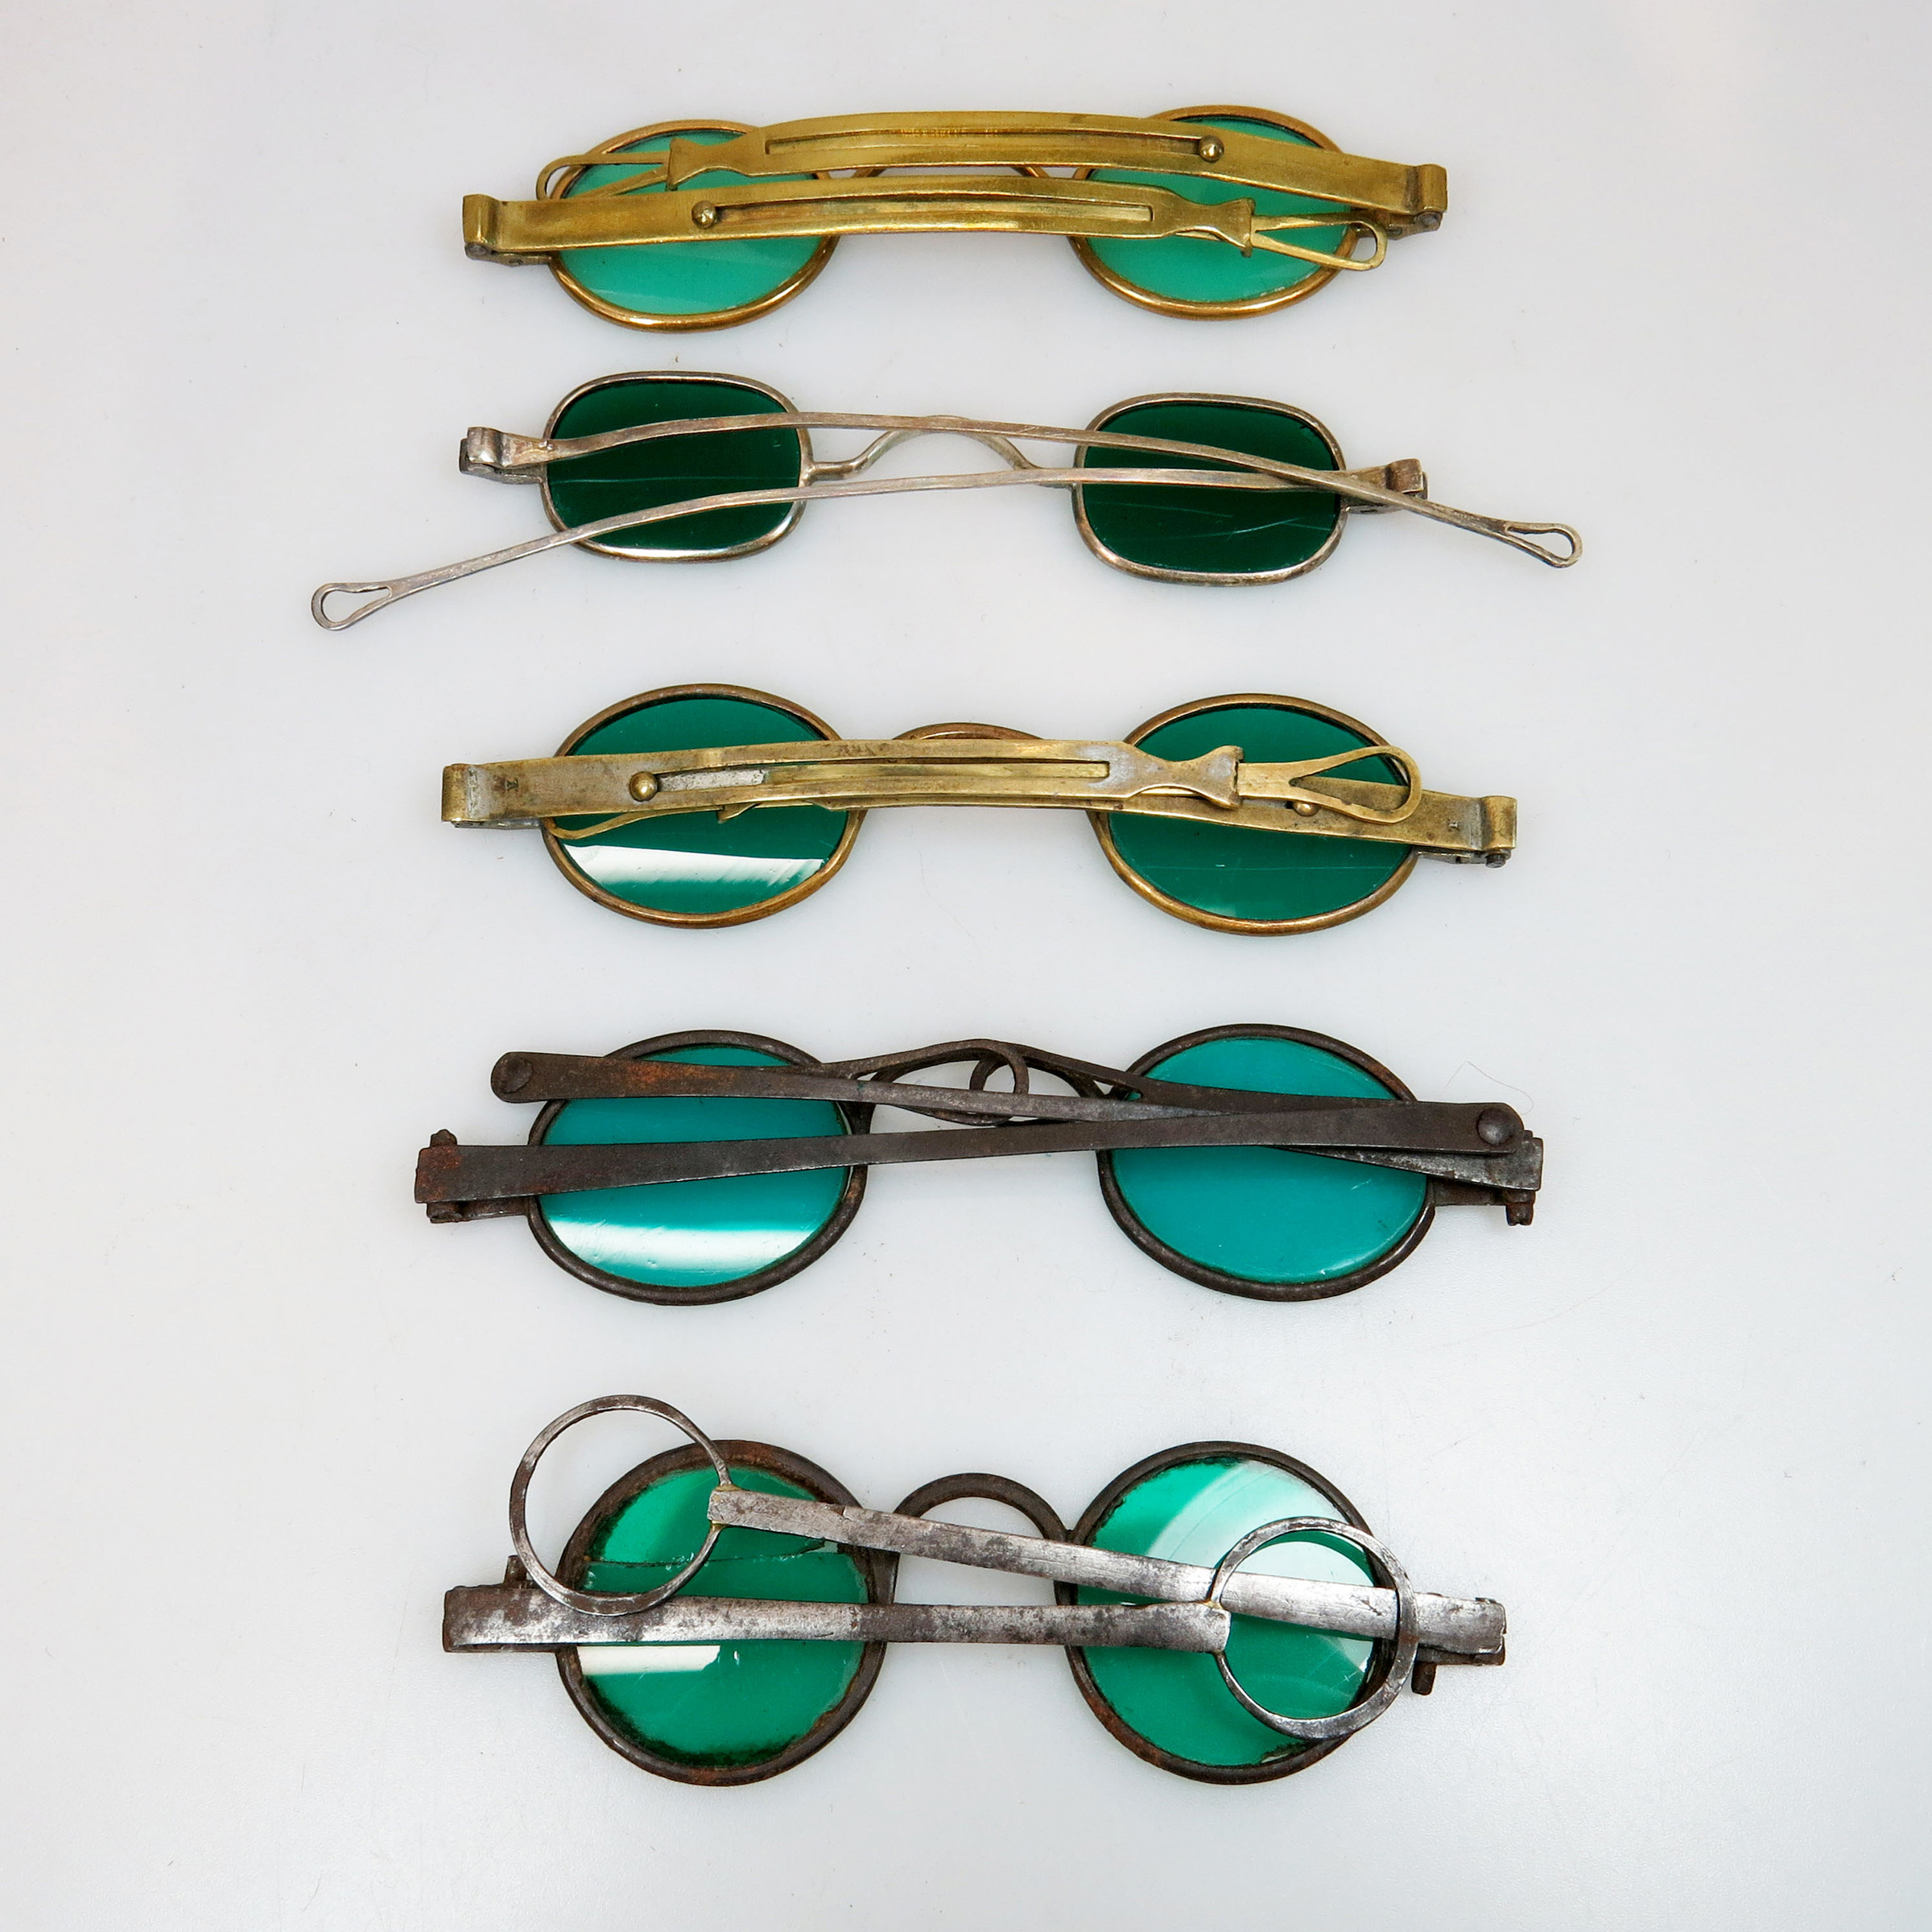 5 Pairs Of 18th & 19th Century Steel And Brass Framed Spectacles